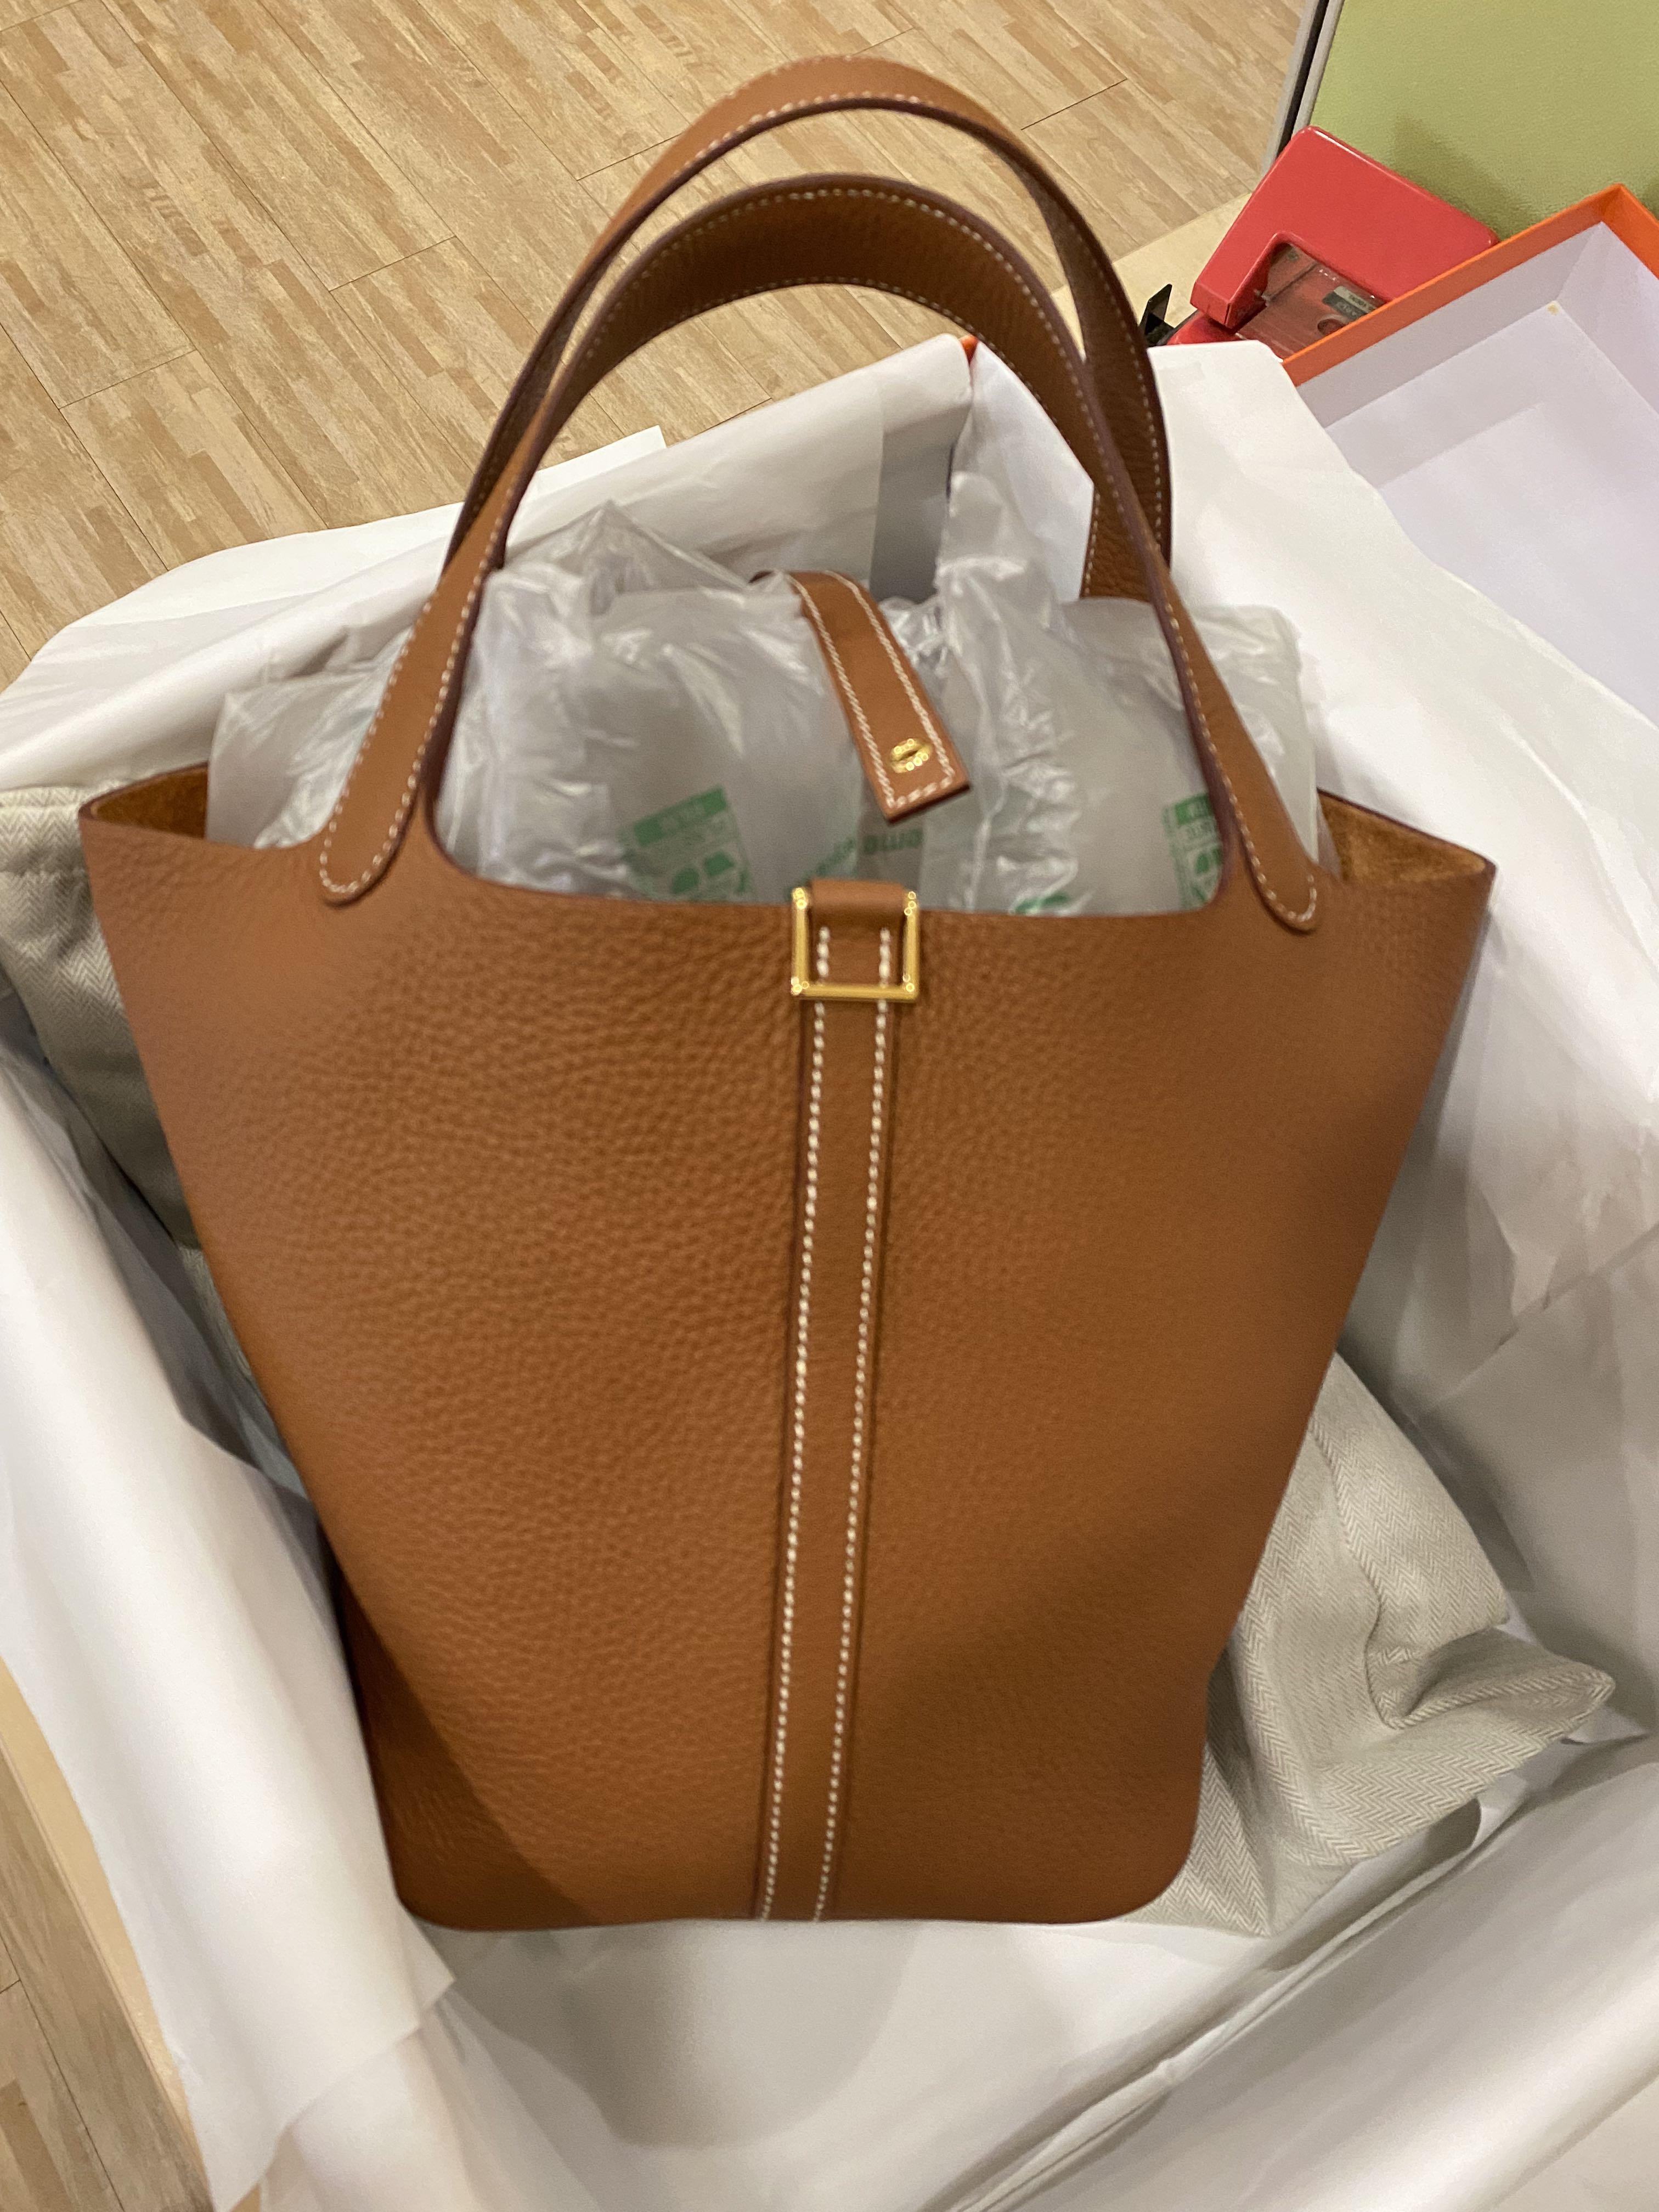 Brand new Hermes Picotin 22 in Gold GHW